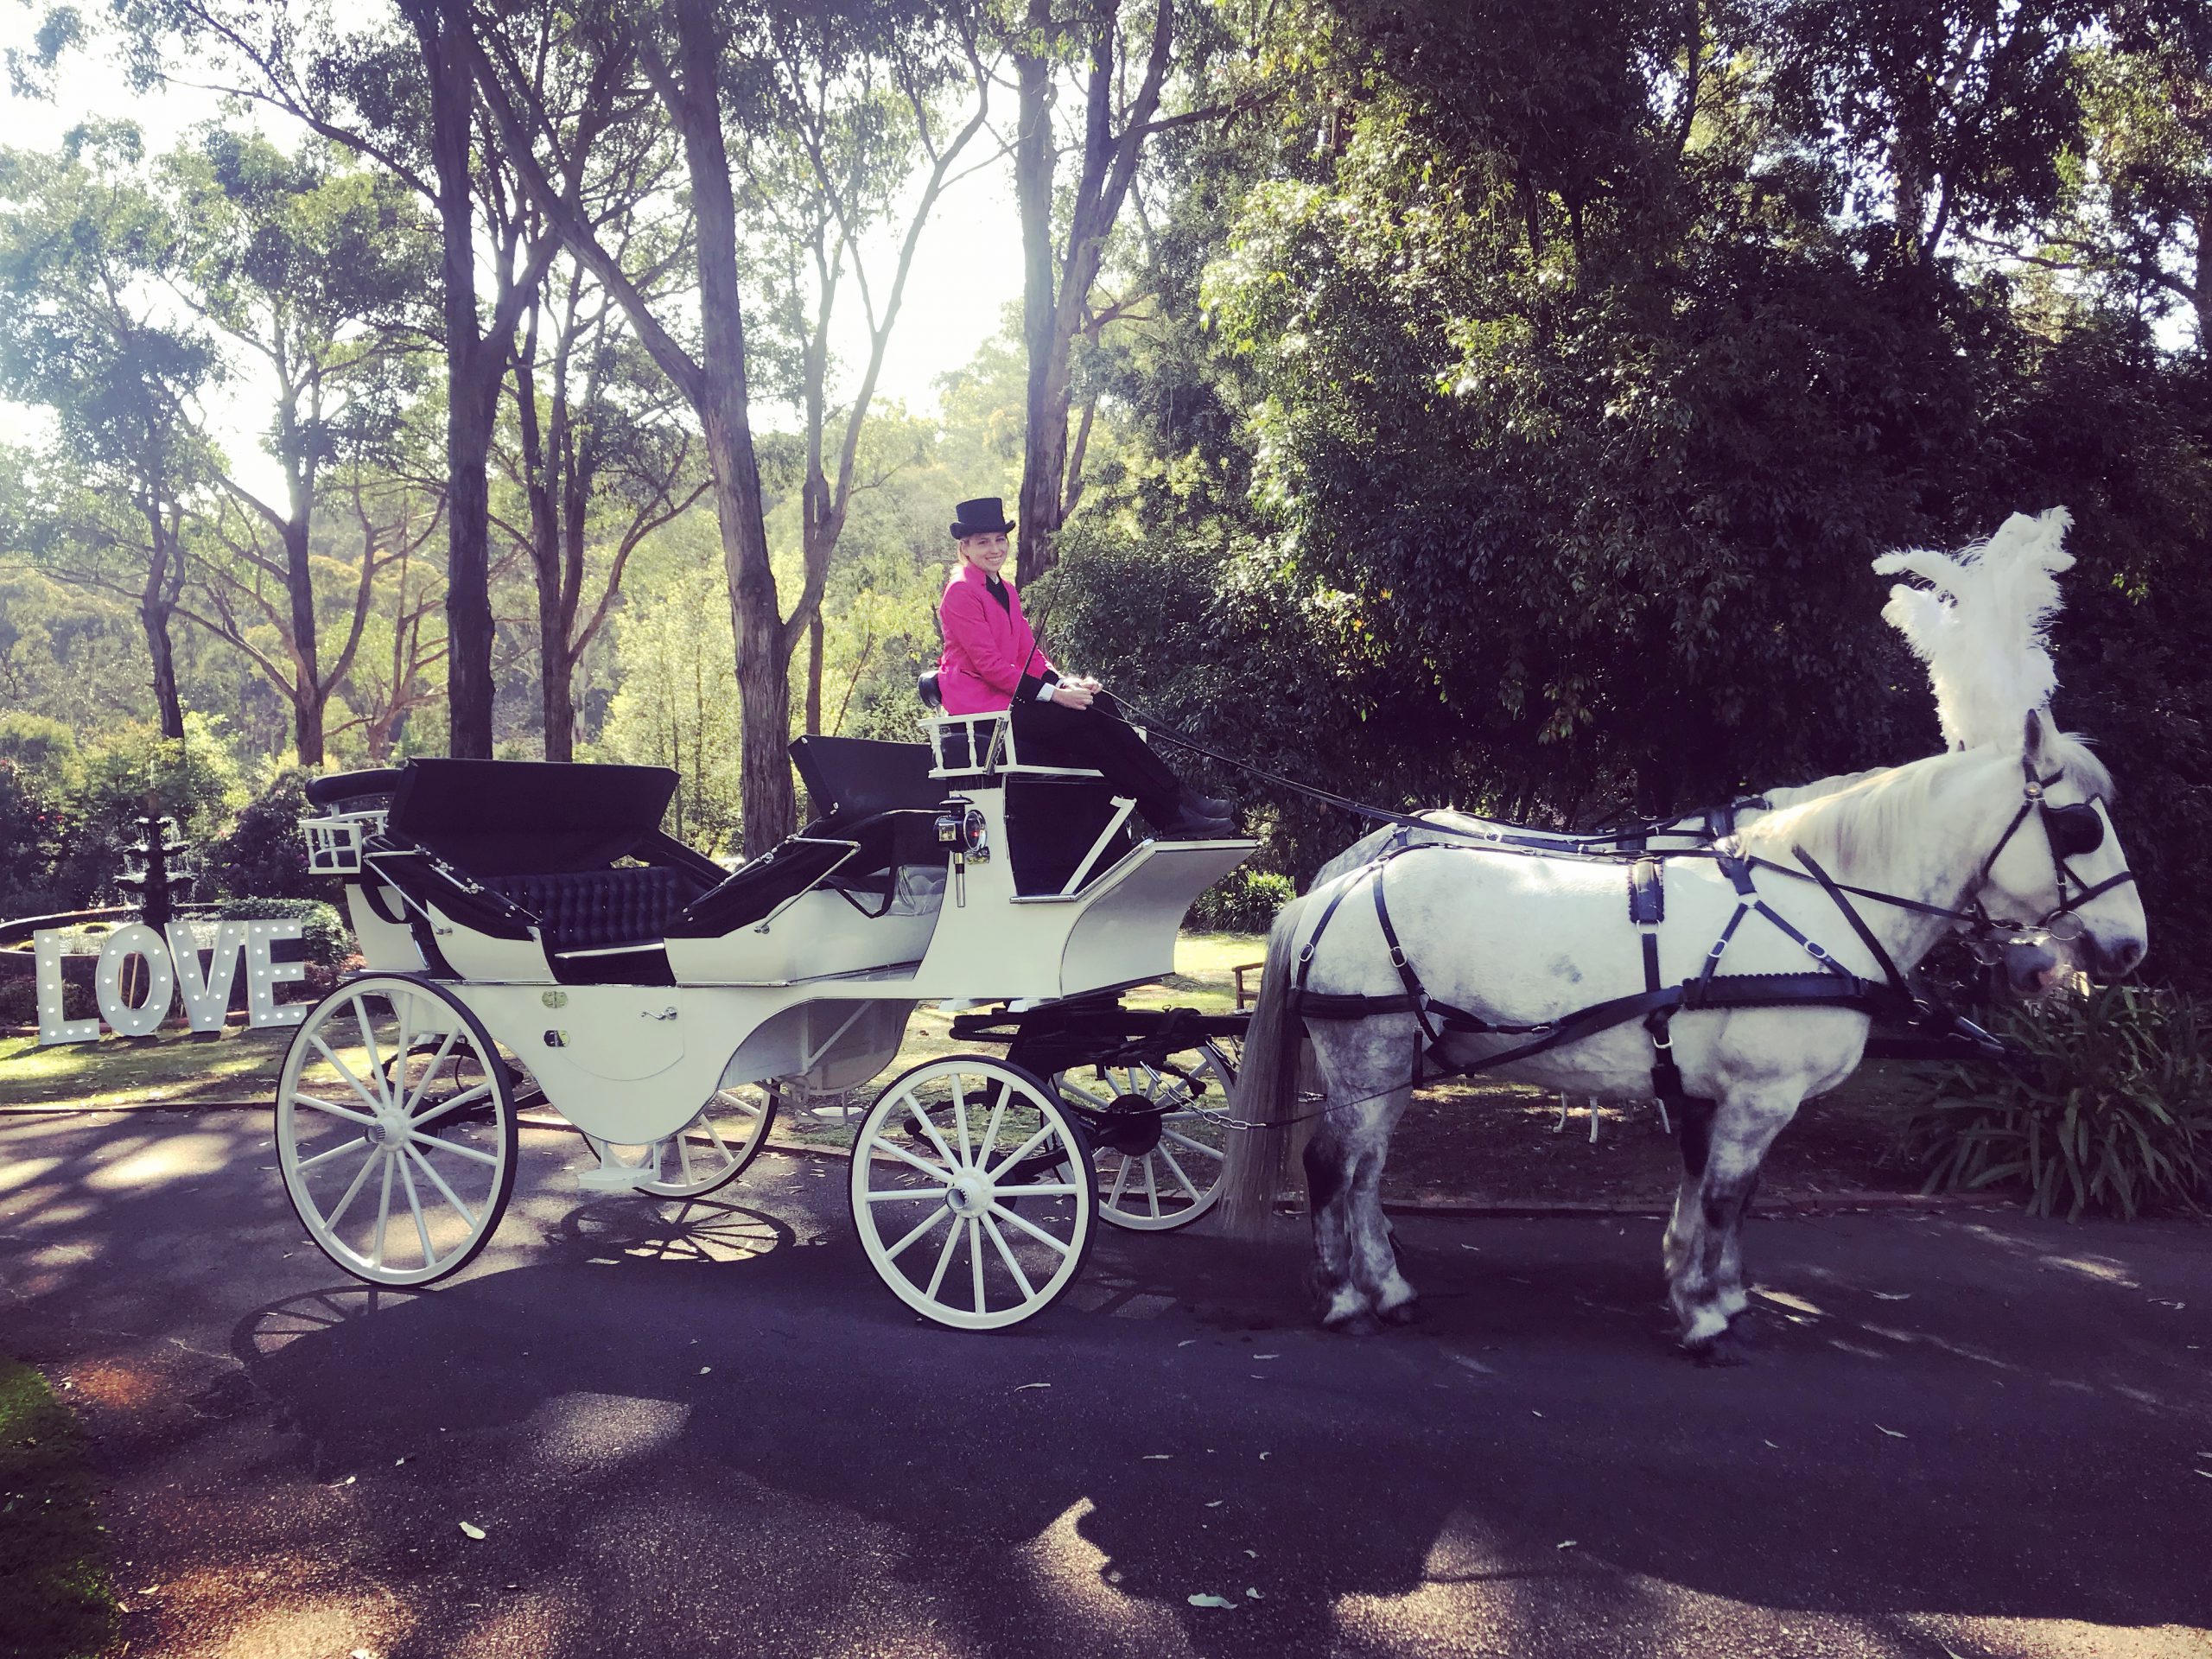 wedding horse and carriage